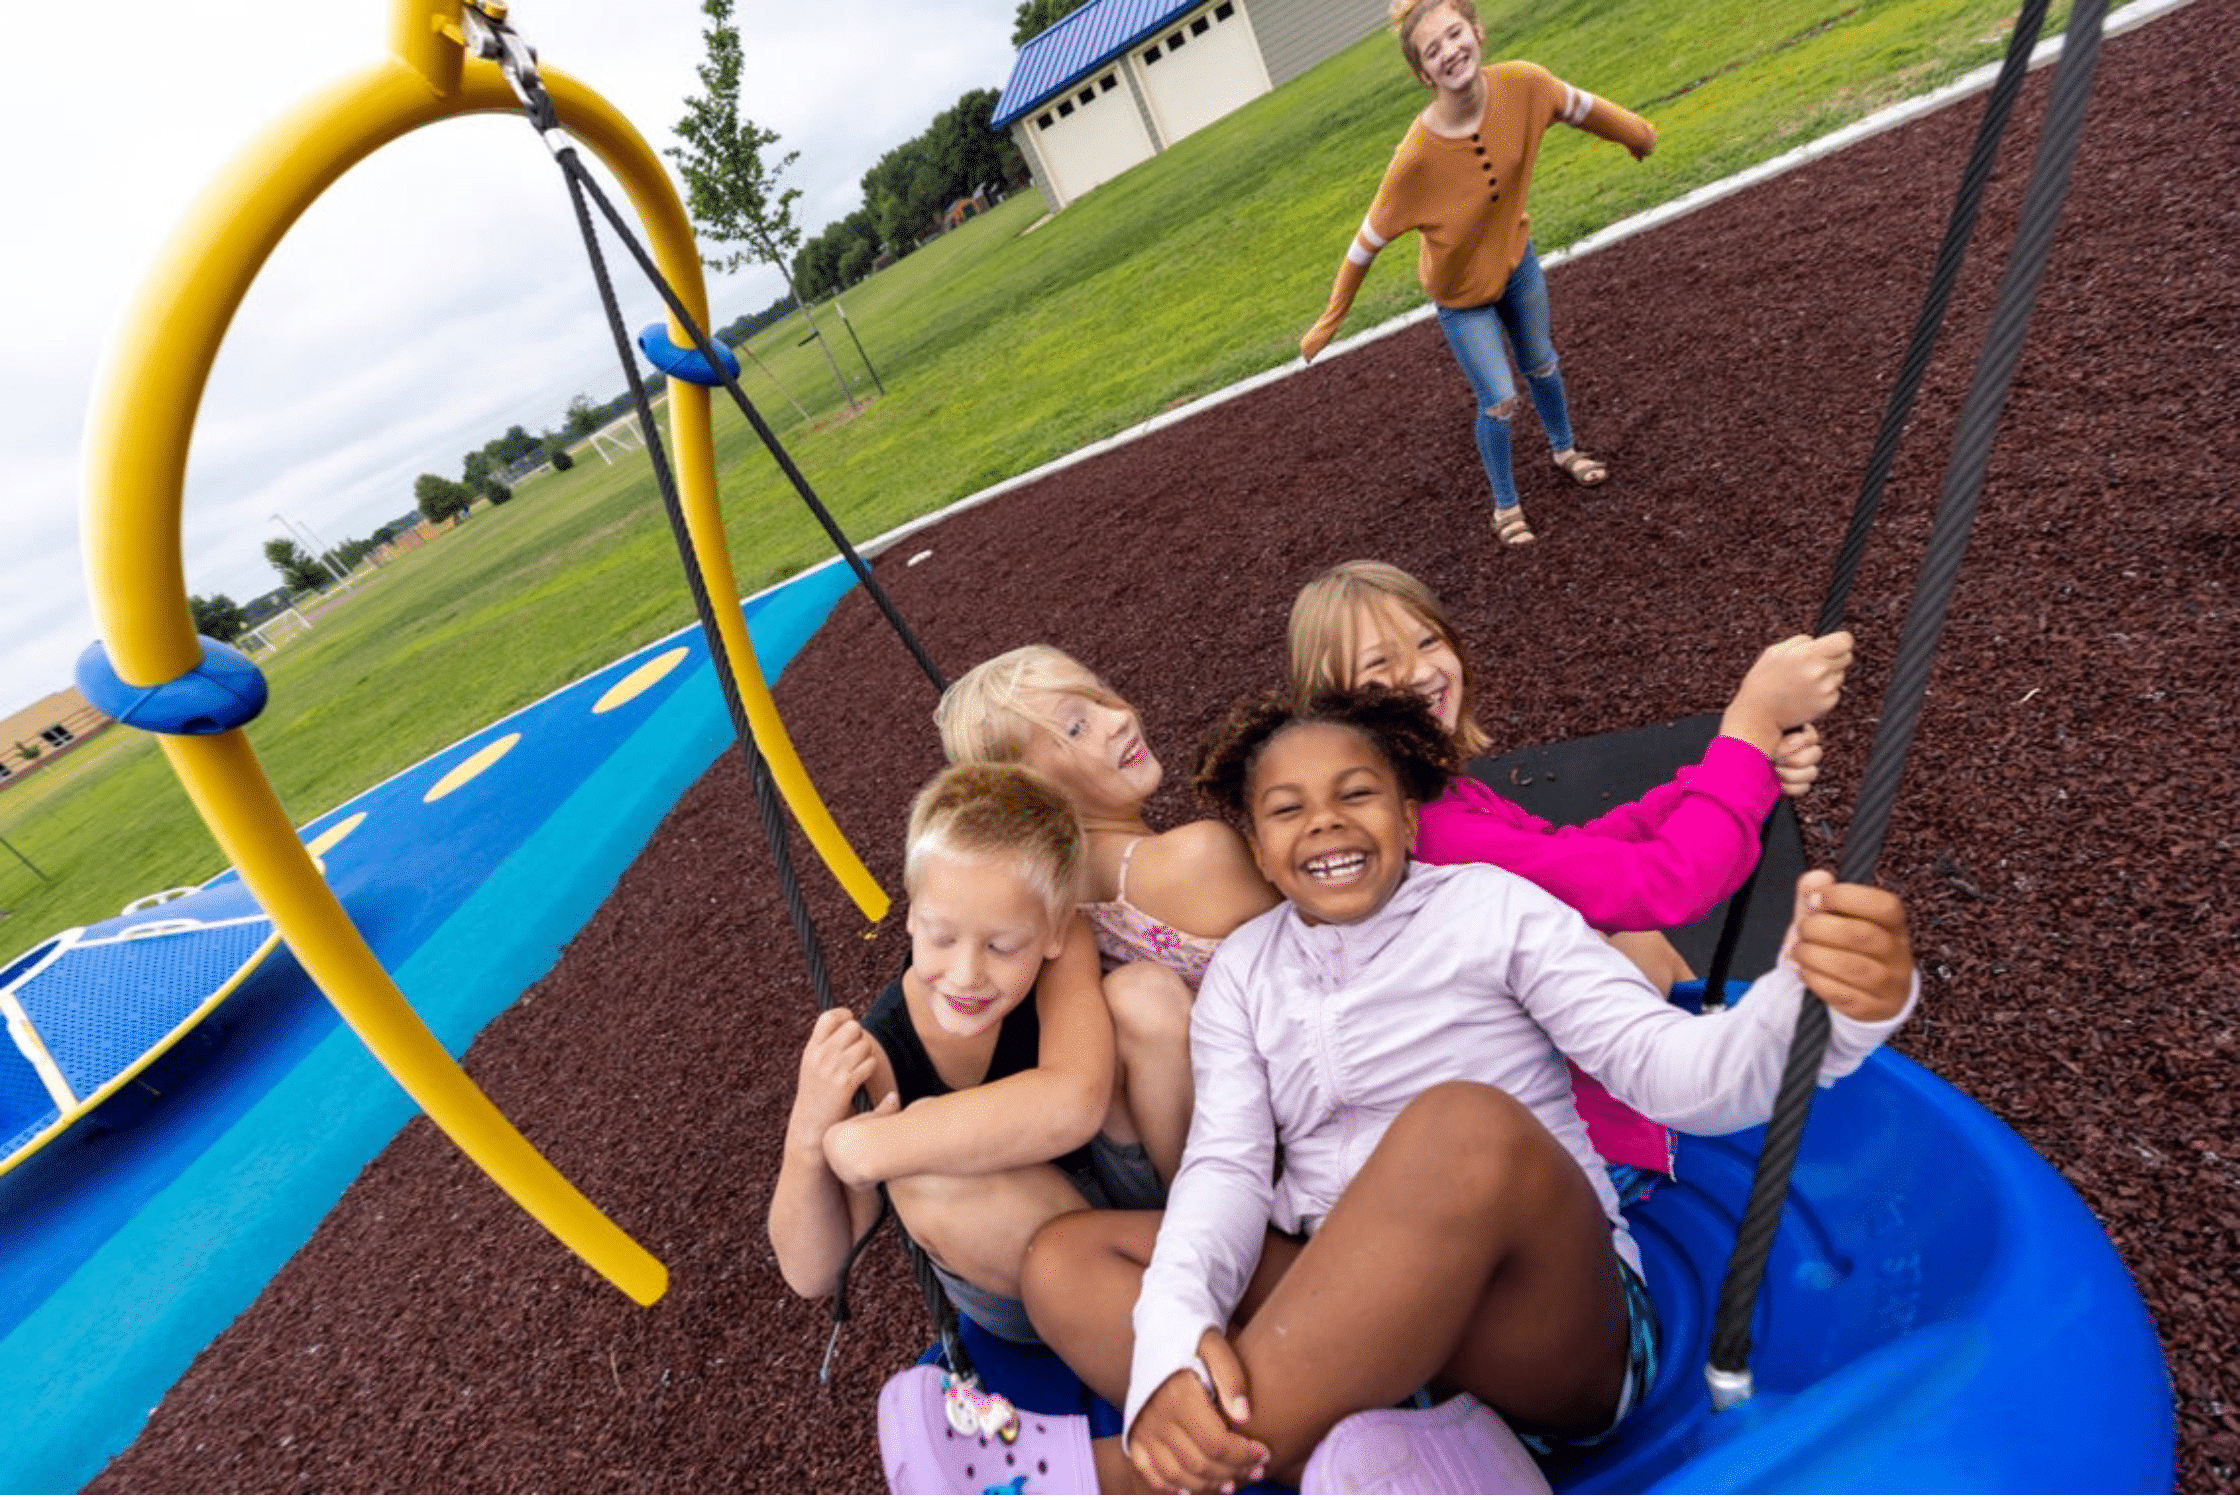 kids playing safely on playground